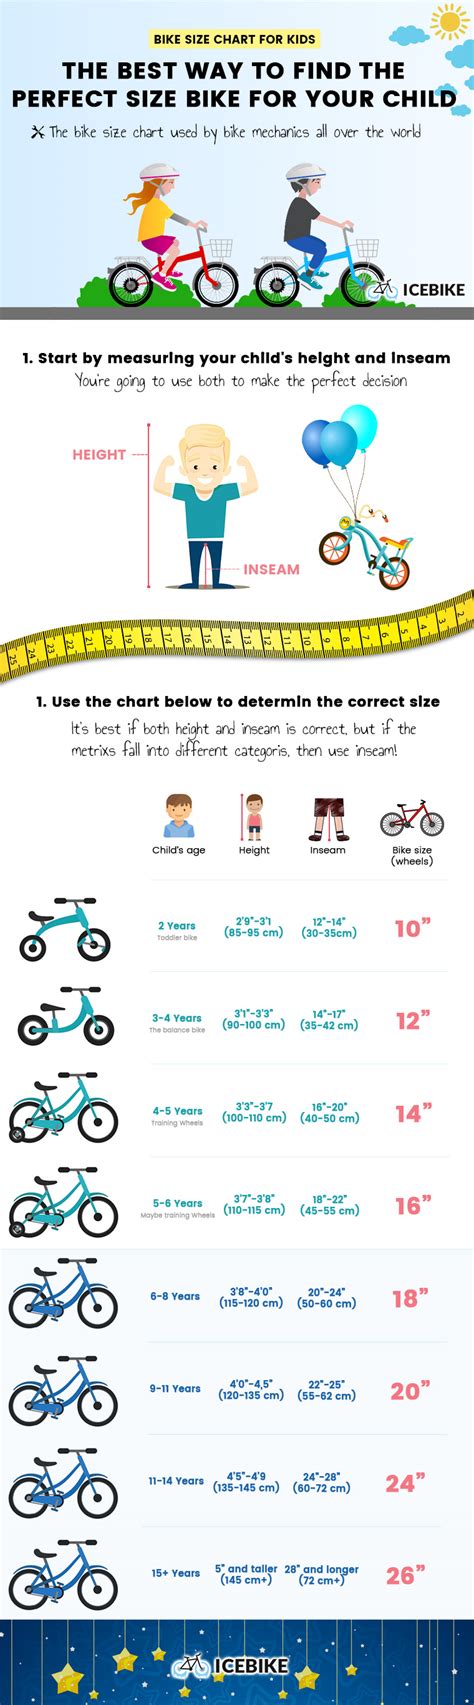 Kids Bike Size Chart The Definitive Guide To Kids Bike Sizes Infographic